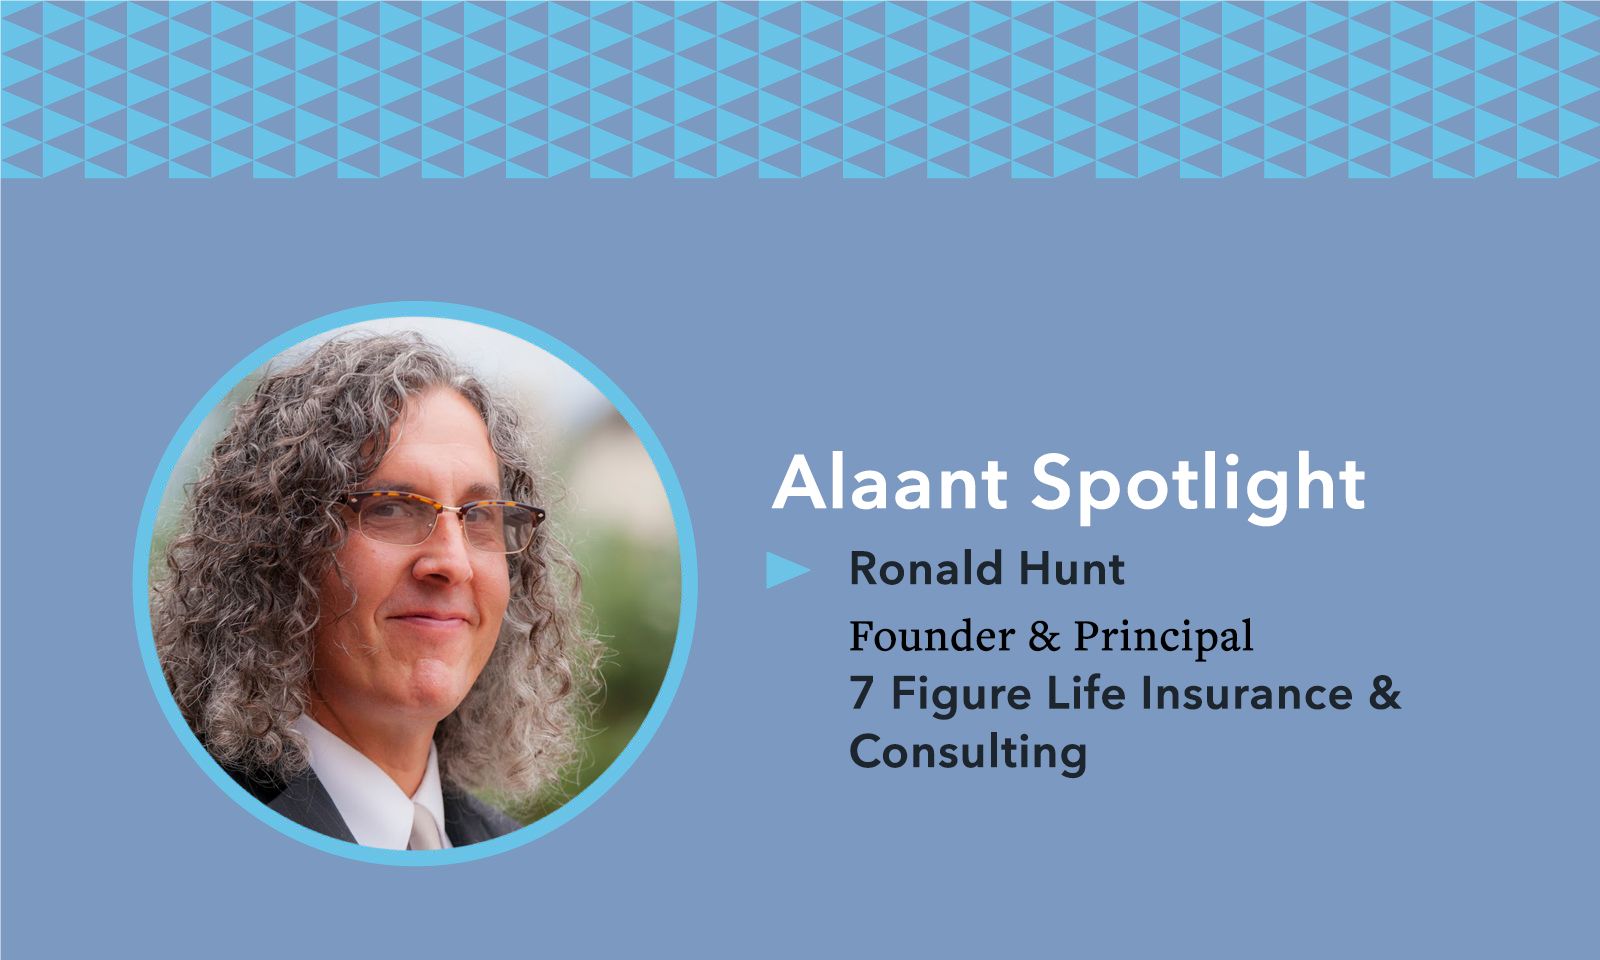 Alaant Spotlight Ronald Hunt, Founder and Principal, 7 Figure Life Insurance & Consulting